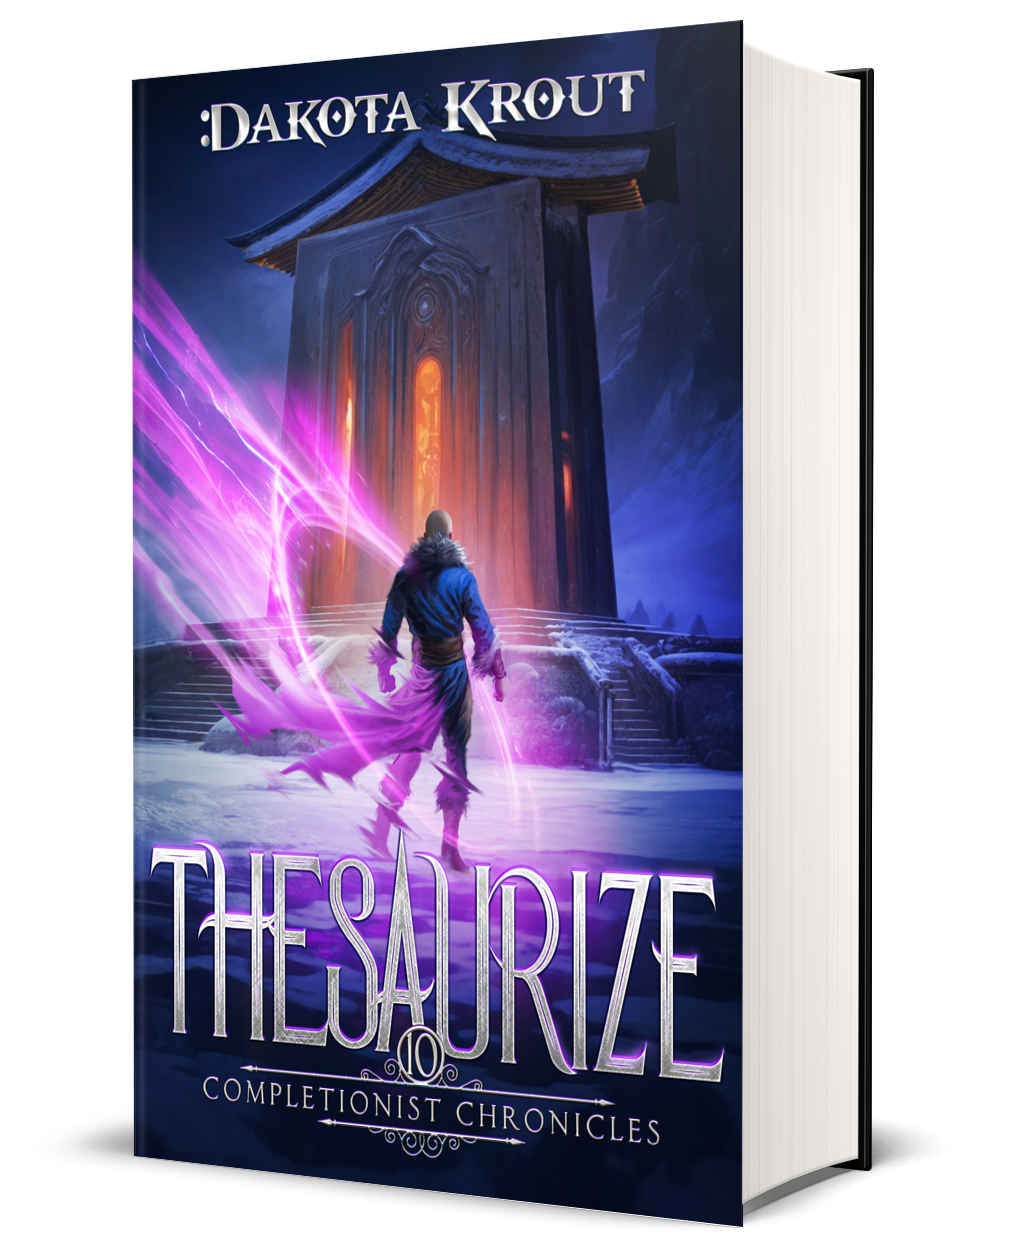 *PREORDER* Thesaurize Signed Hardcover